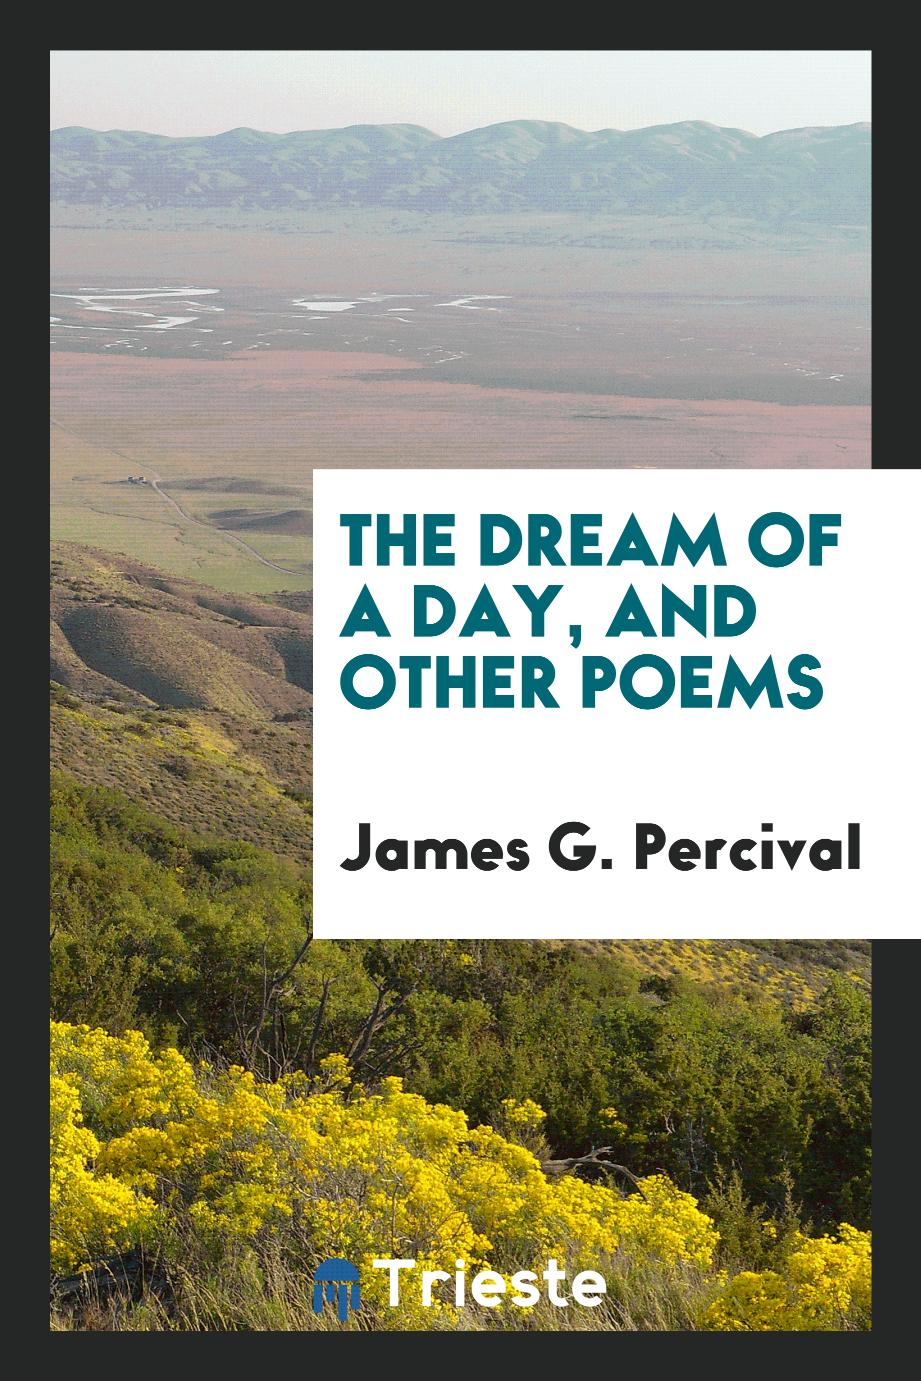 The dream of a day, and other poems